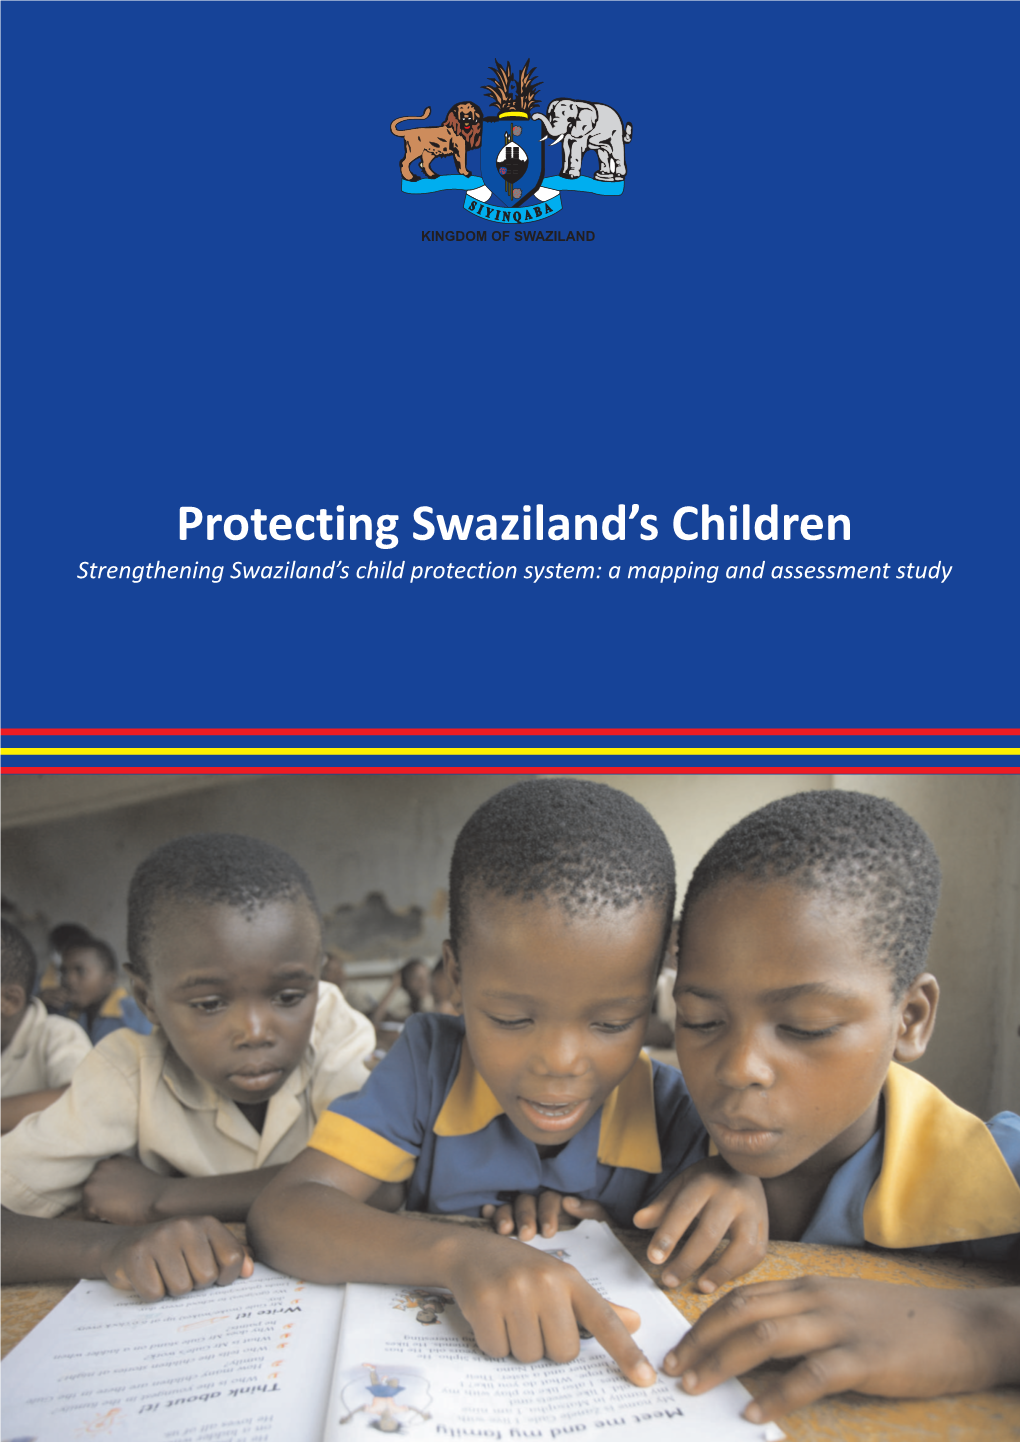 Protecting Swaziland's Children